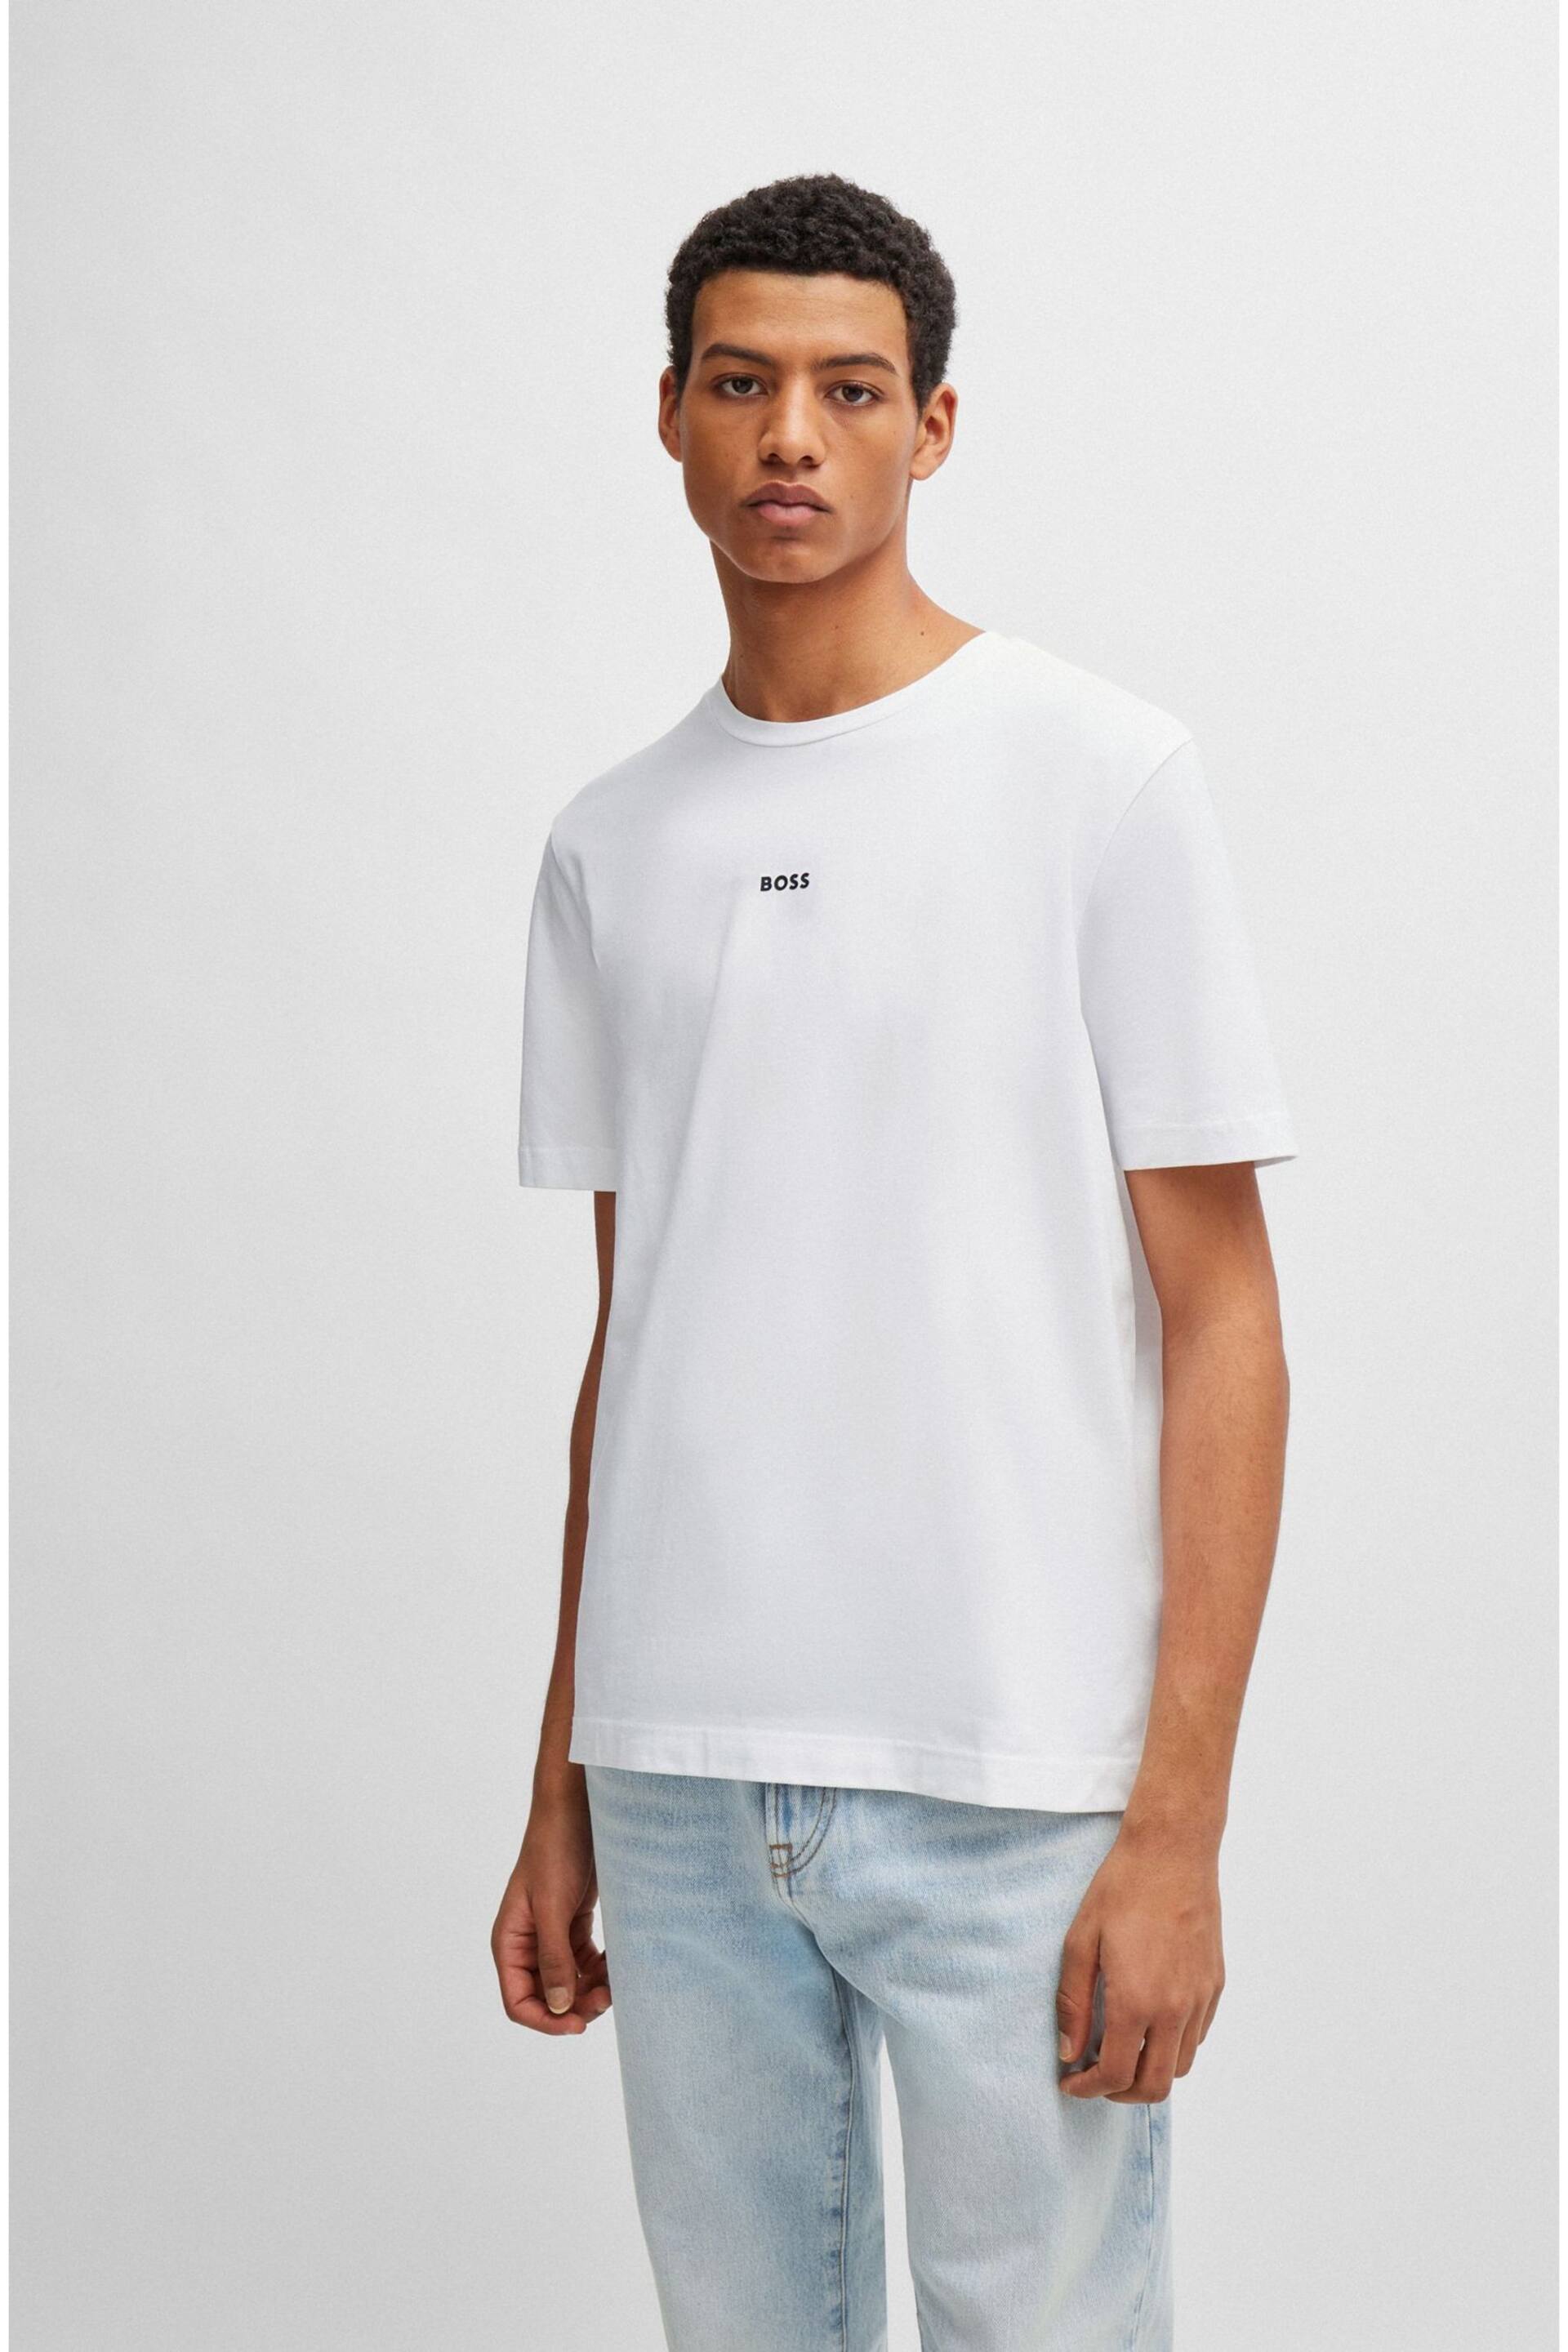 BOSS White Relaxed Fit Central Logo T-Shirt - Image 1 of 5